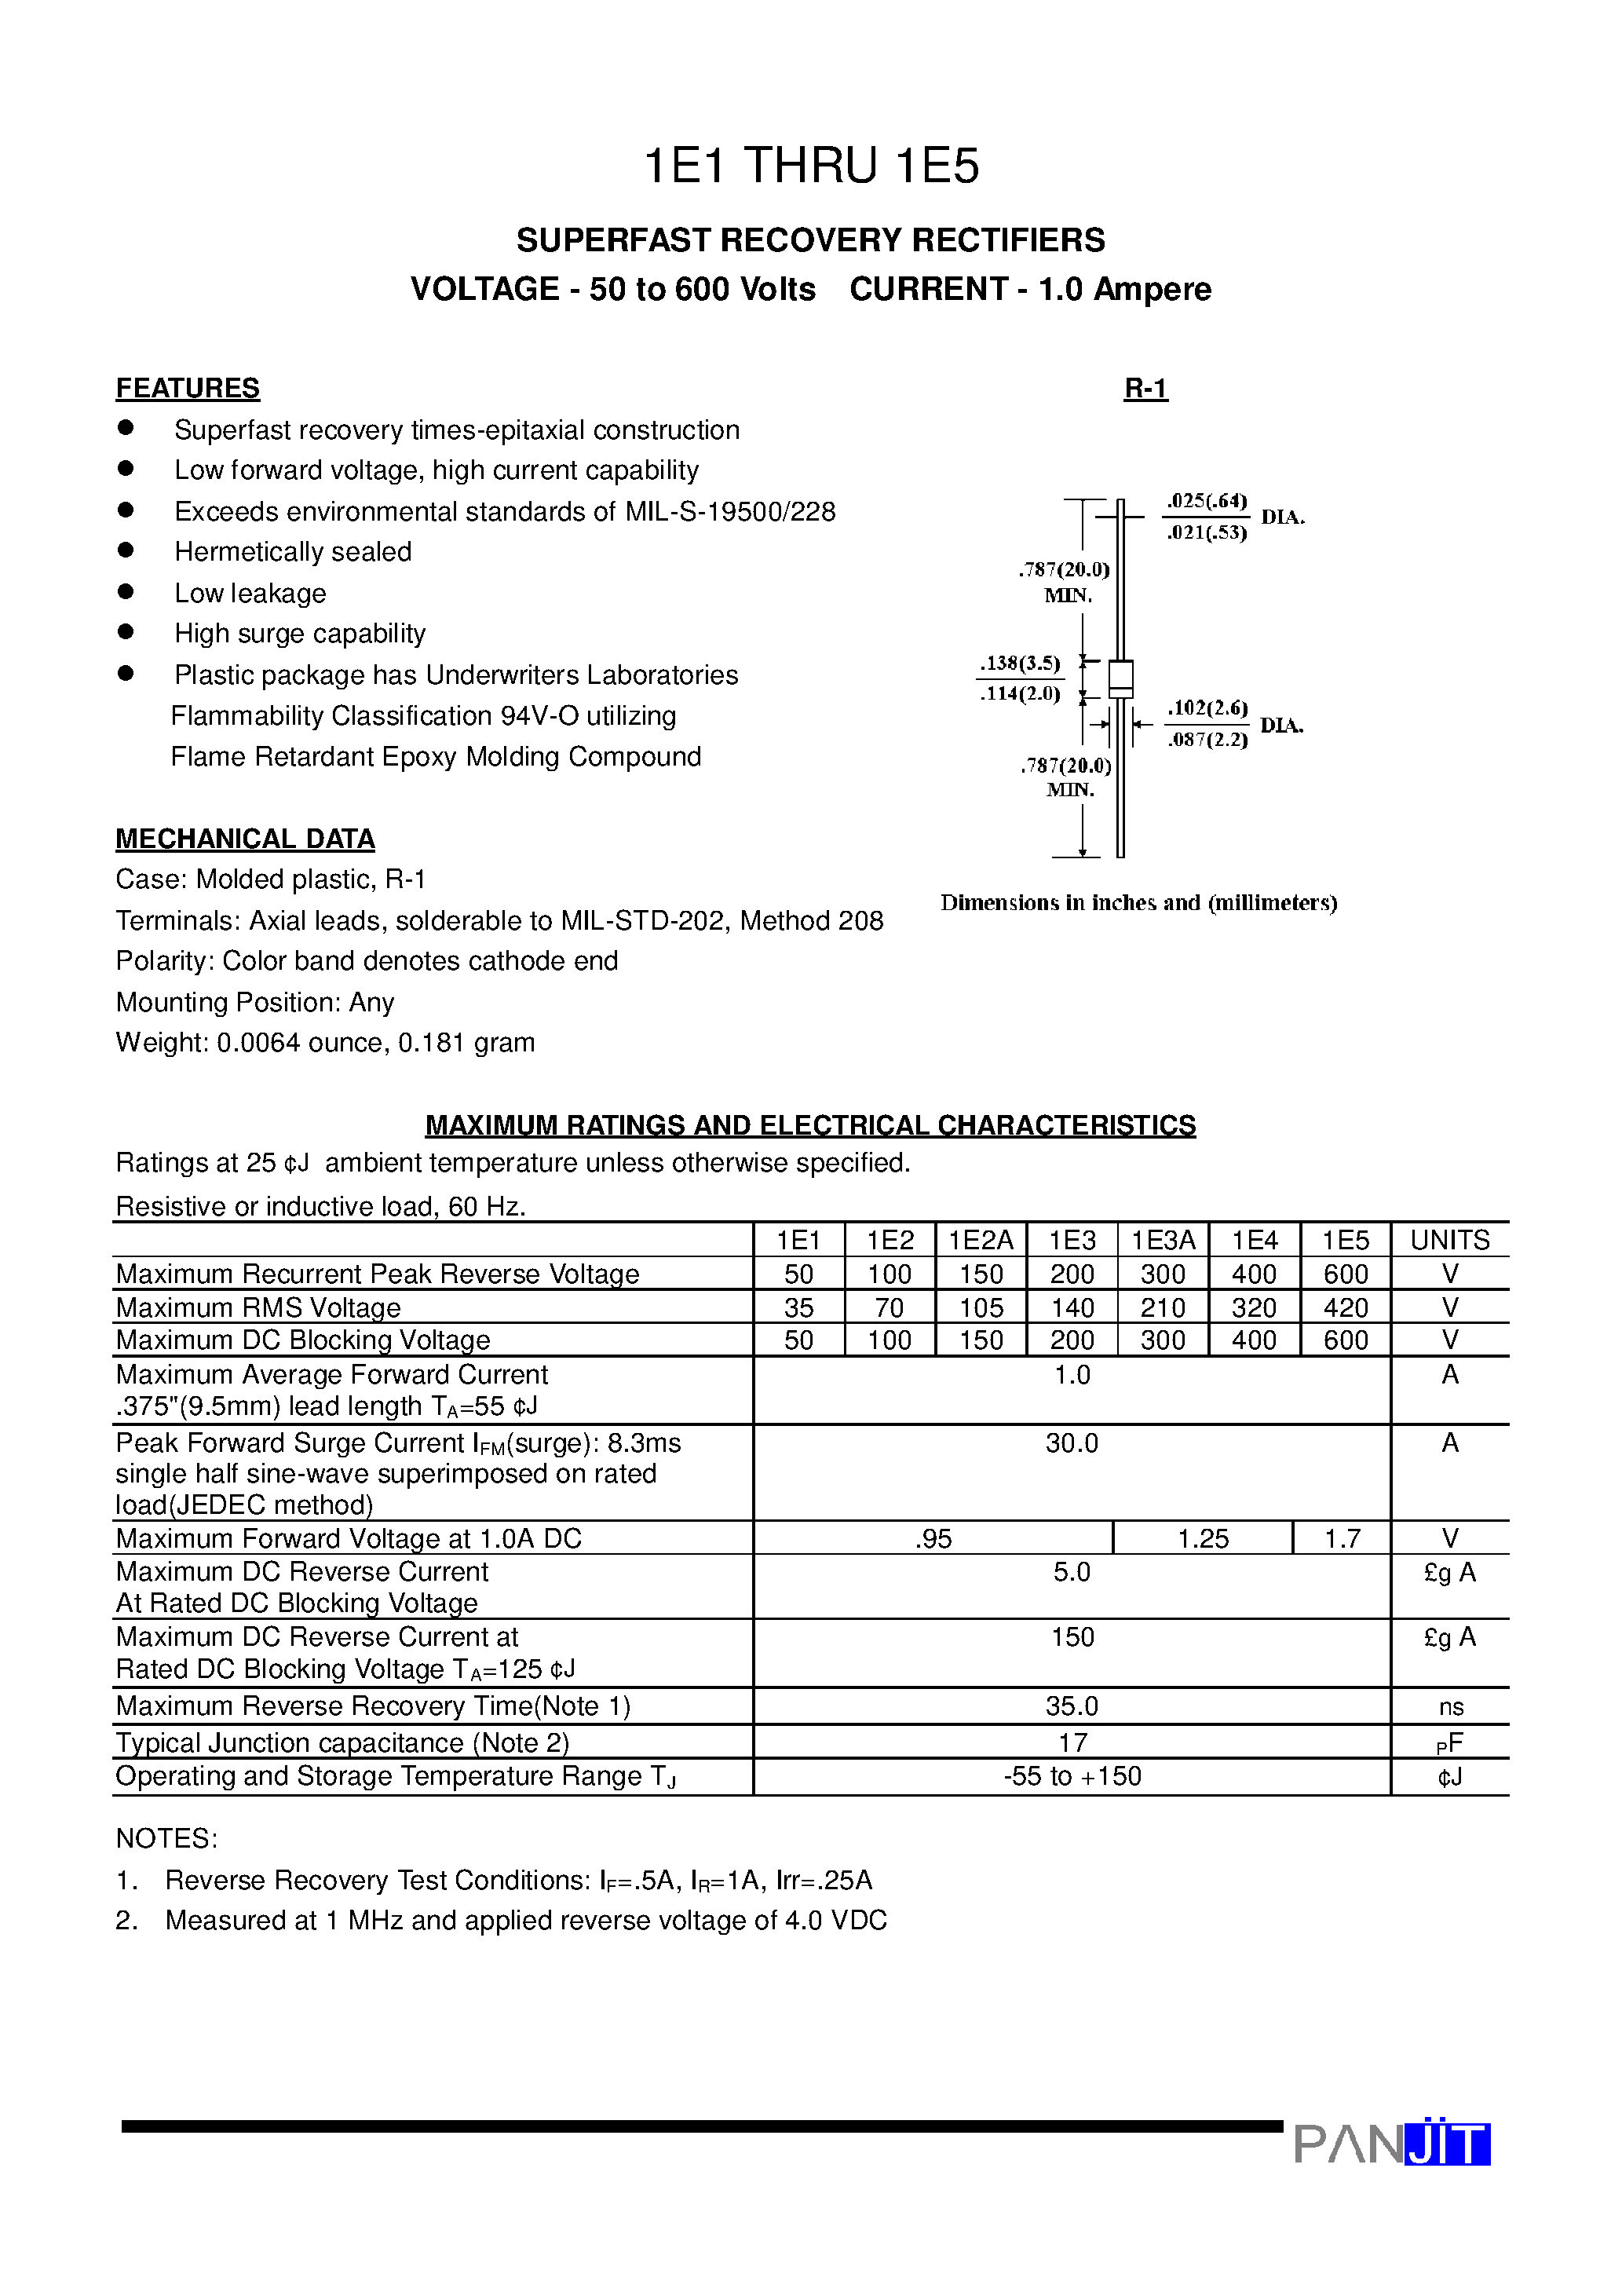 Datasheet 1.00E+01 - SUPERFAST RECOVERY RECTIFIERS(VOLTAGE - 50 to 600 Volts CURRENT - 1.0 Ampere) page 1